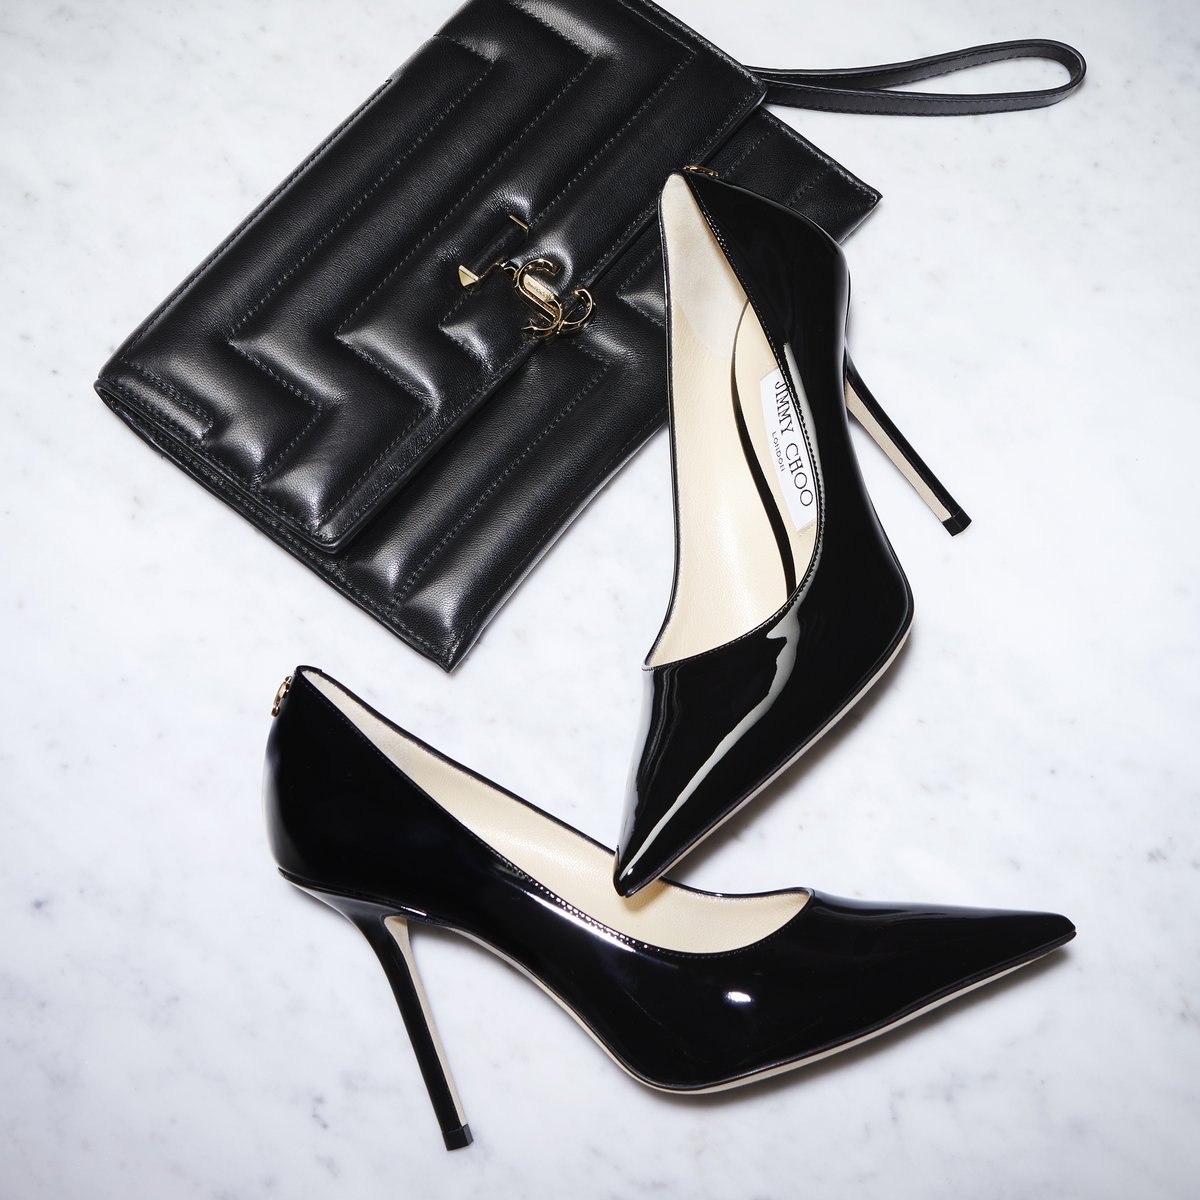 Forever appeal: future-proof your wardrobe with classic pieces you'll cherish. Case in point, Love pumps and an Avenue handbag #JimmyChoo bit.ly/3GXjBfU